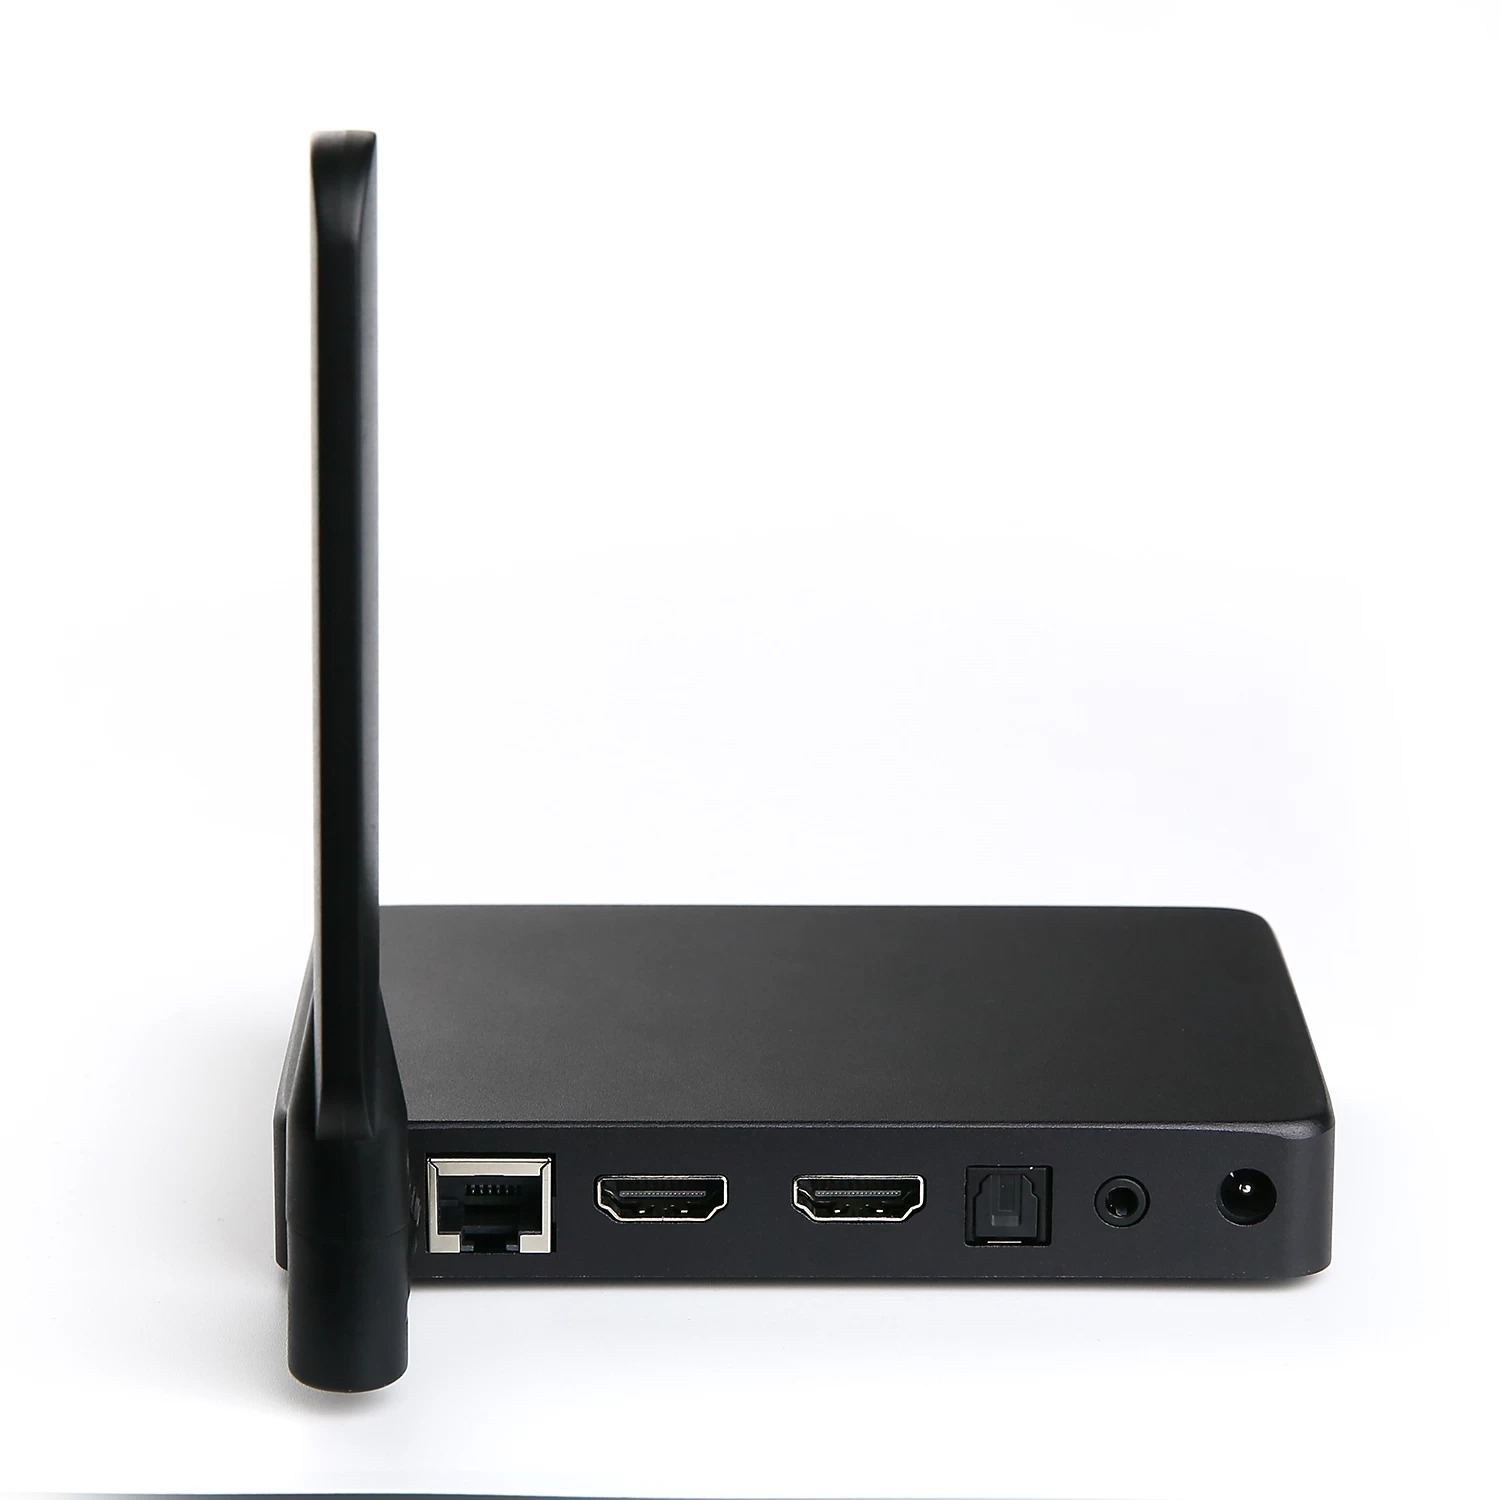 Android TV Box Anbieter, Android TV Box Benutzerdefinierte, Android TV Box unterstützt LED / LCD